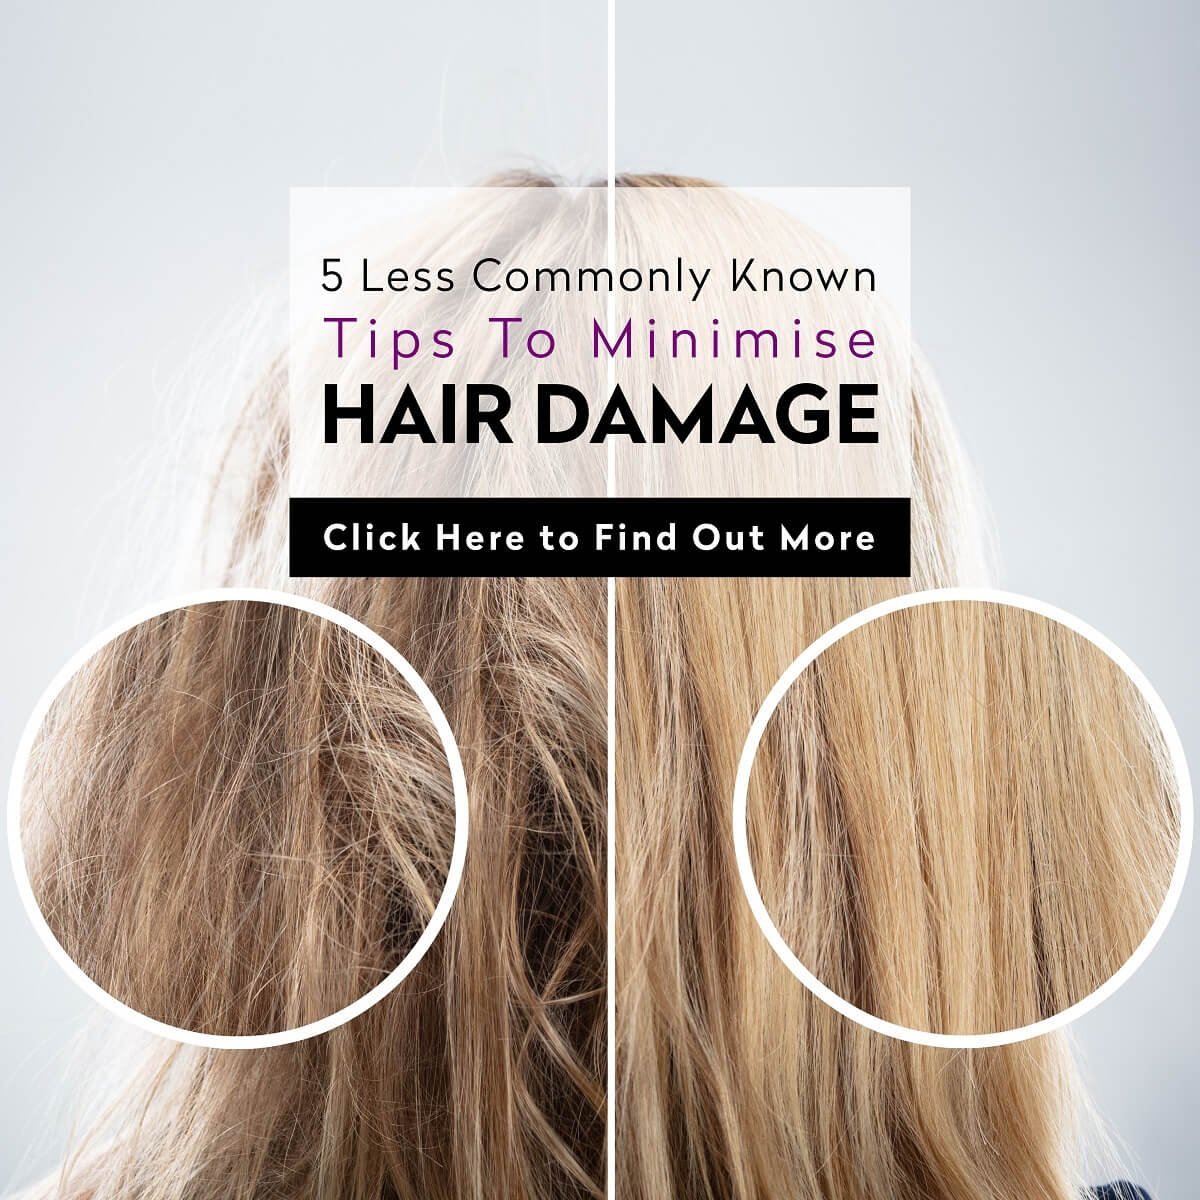 Can You Reverse The Damage Caused By Over-bleaching?